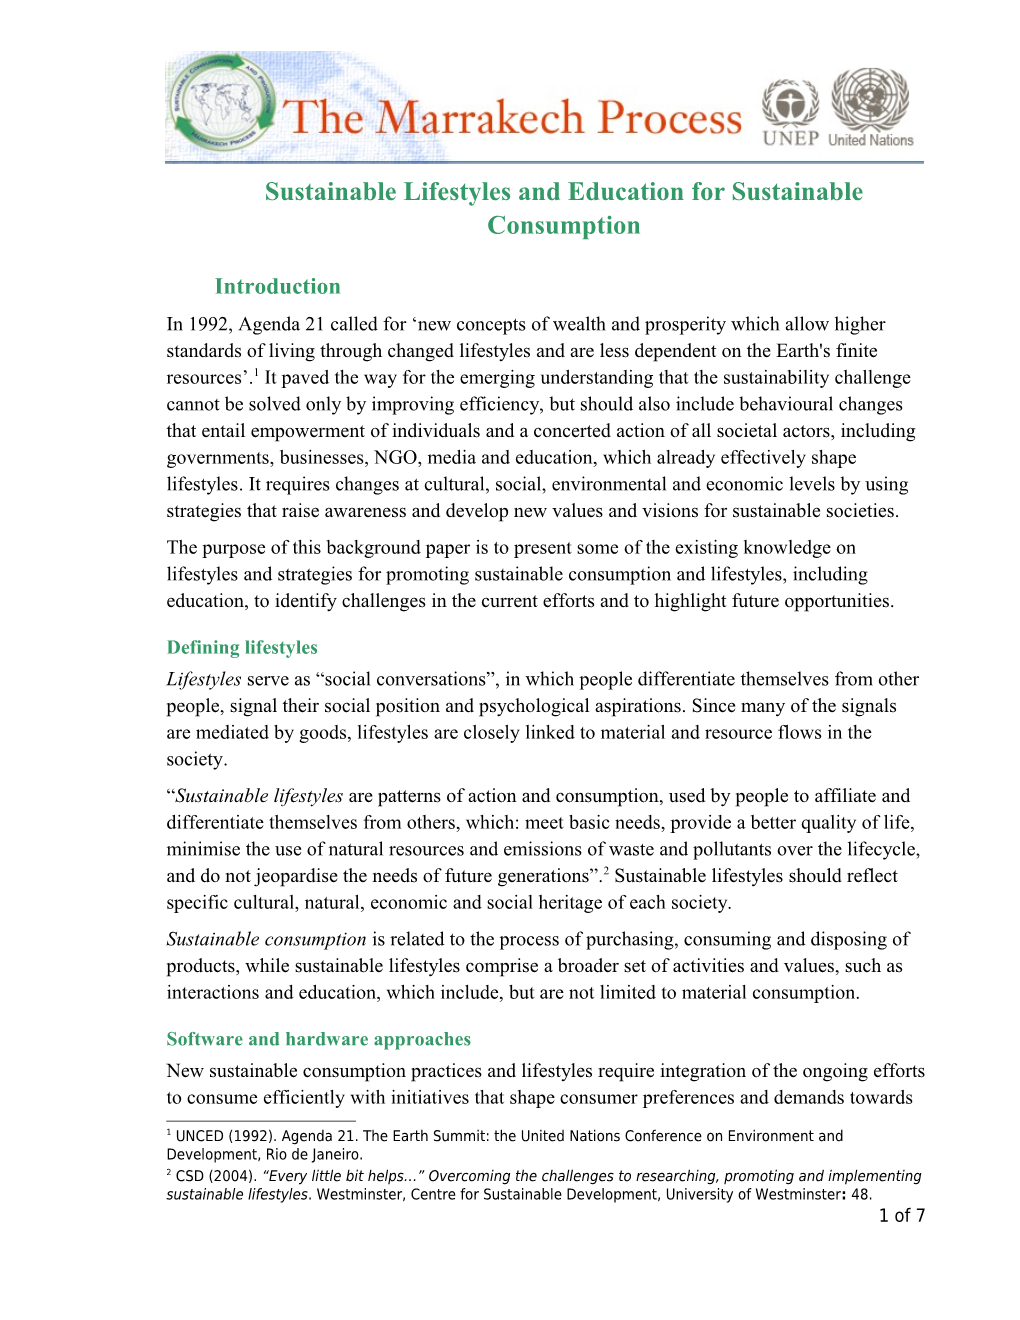 Sustainable Lifestyles and Education for Sustainable Consumption